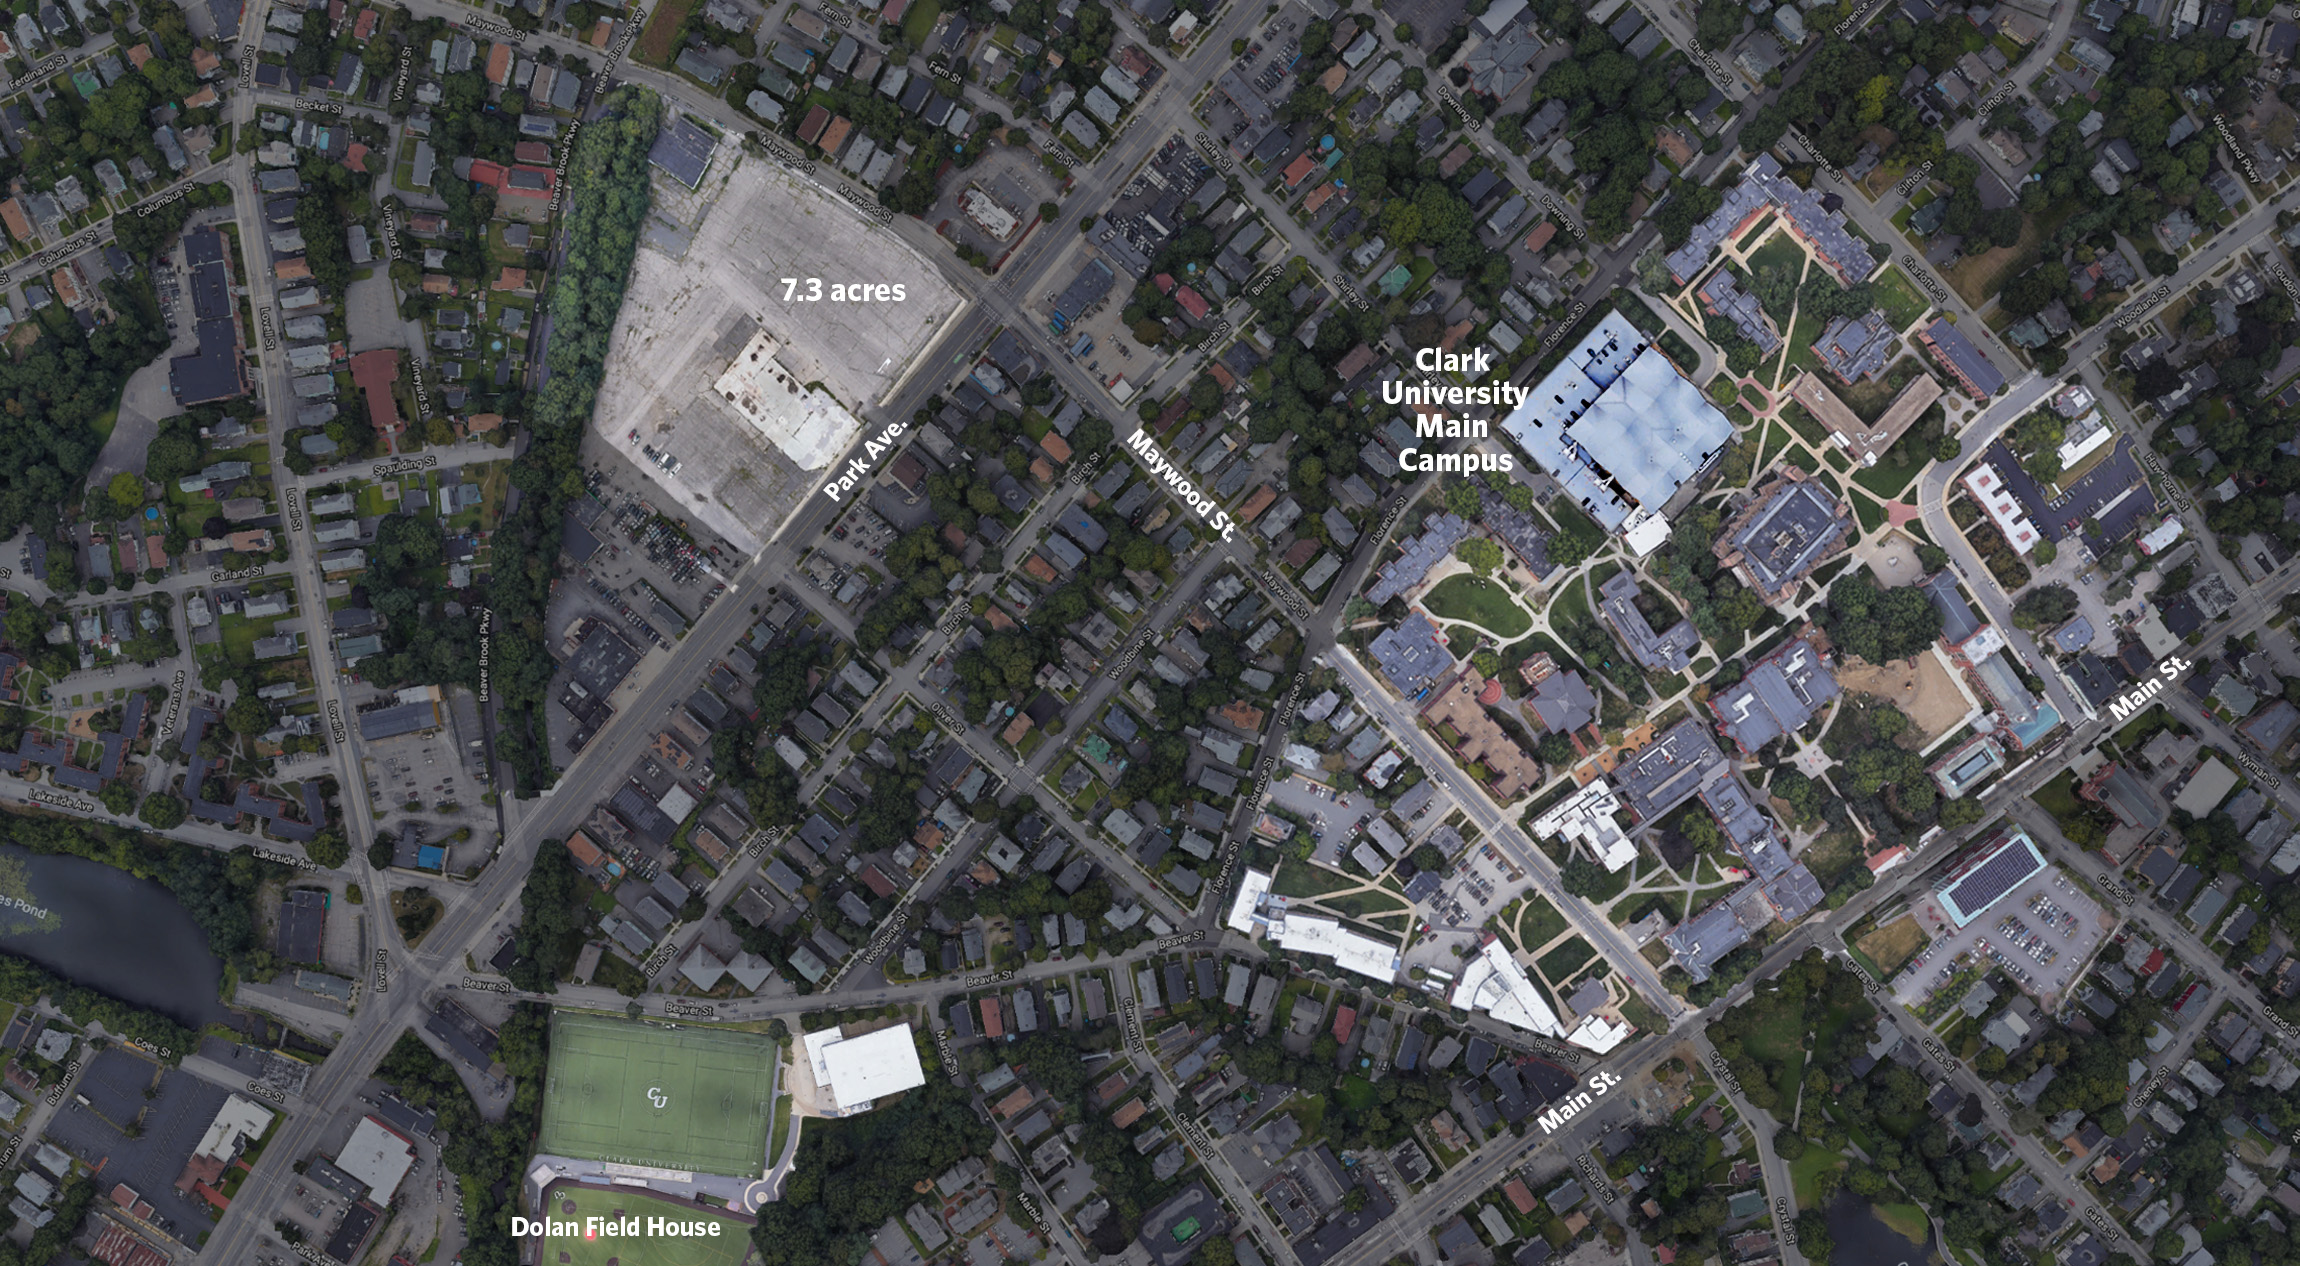 Aerial shot of Park Avenue parcel with Clark campus highlighted